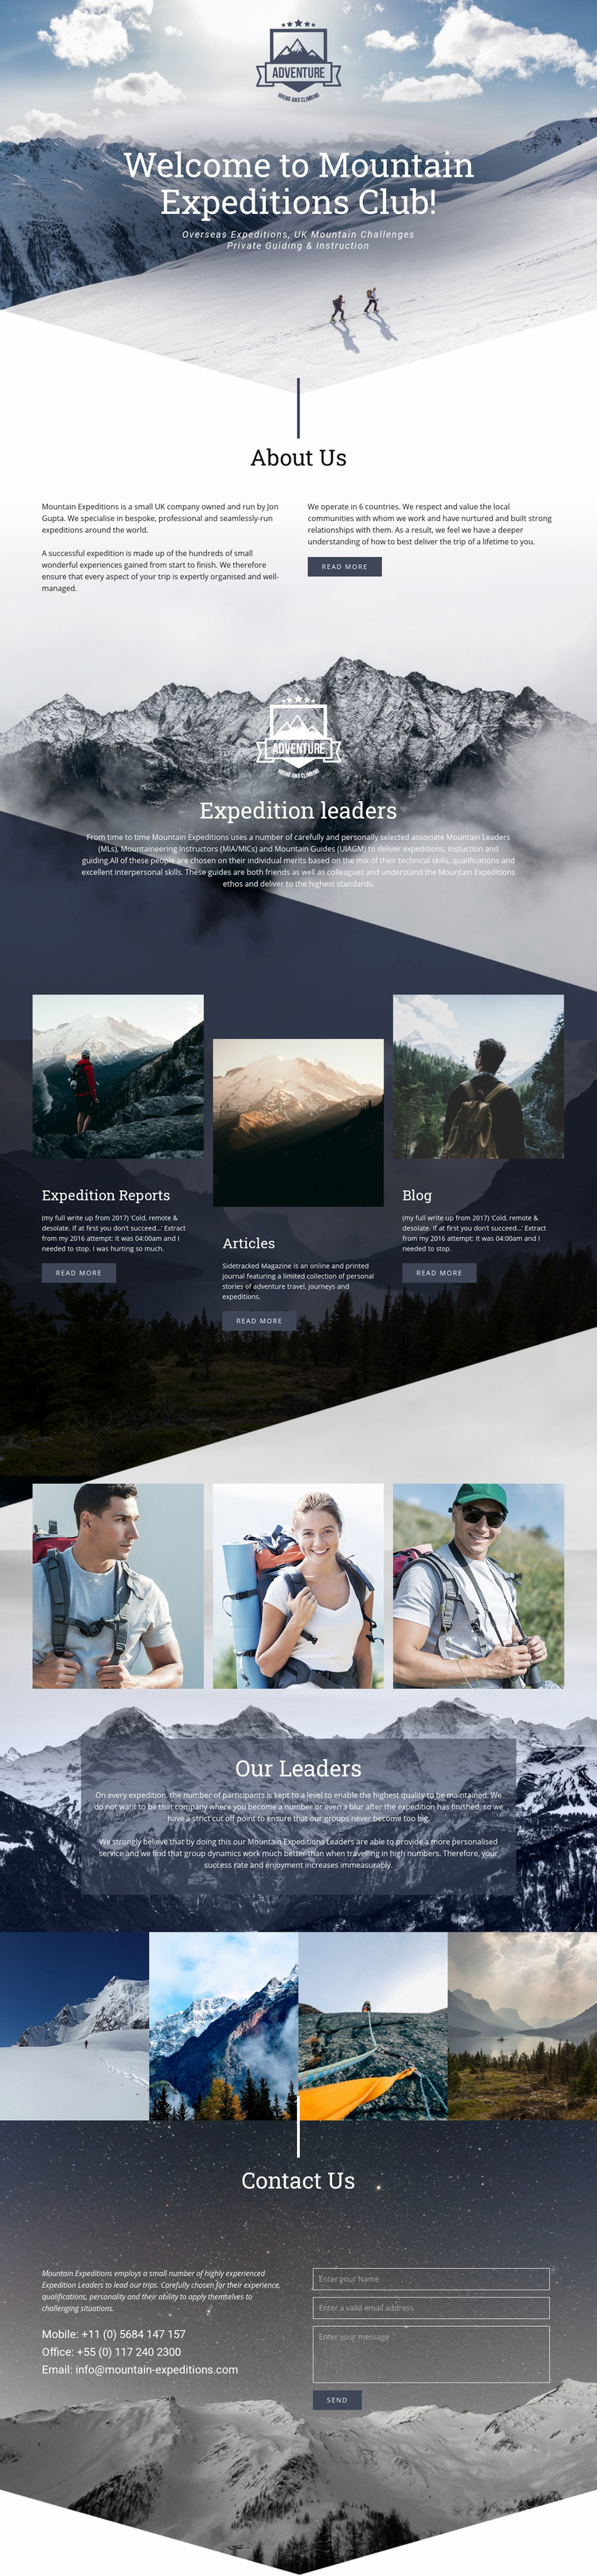 Extreme mountain expedition Squarespace Template Alternative